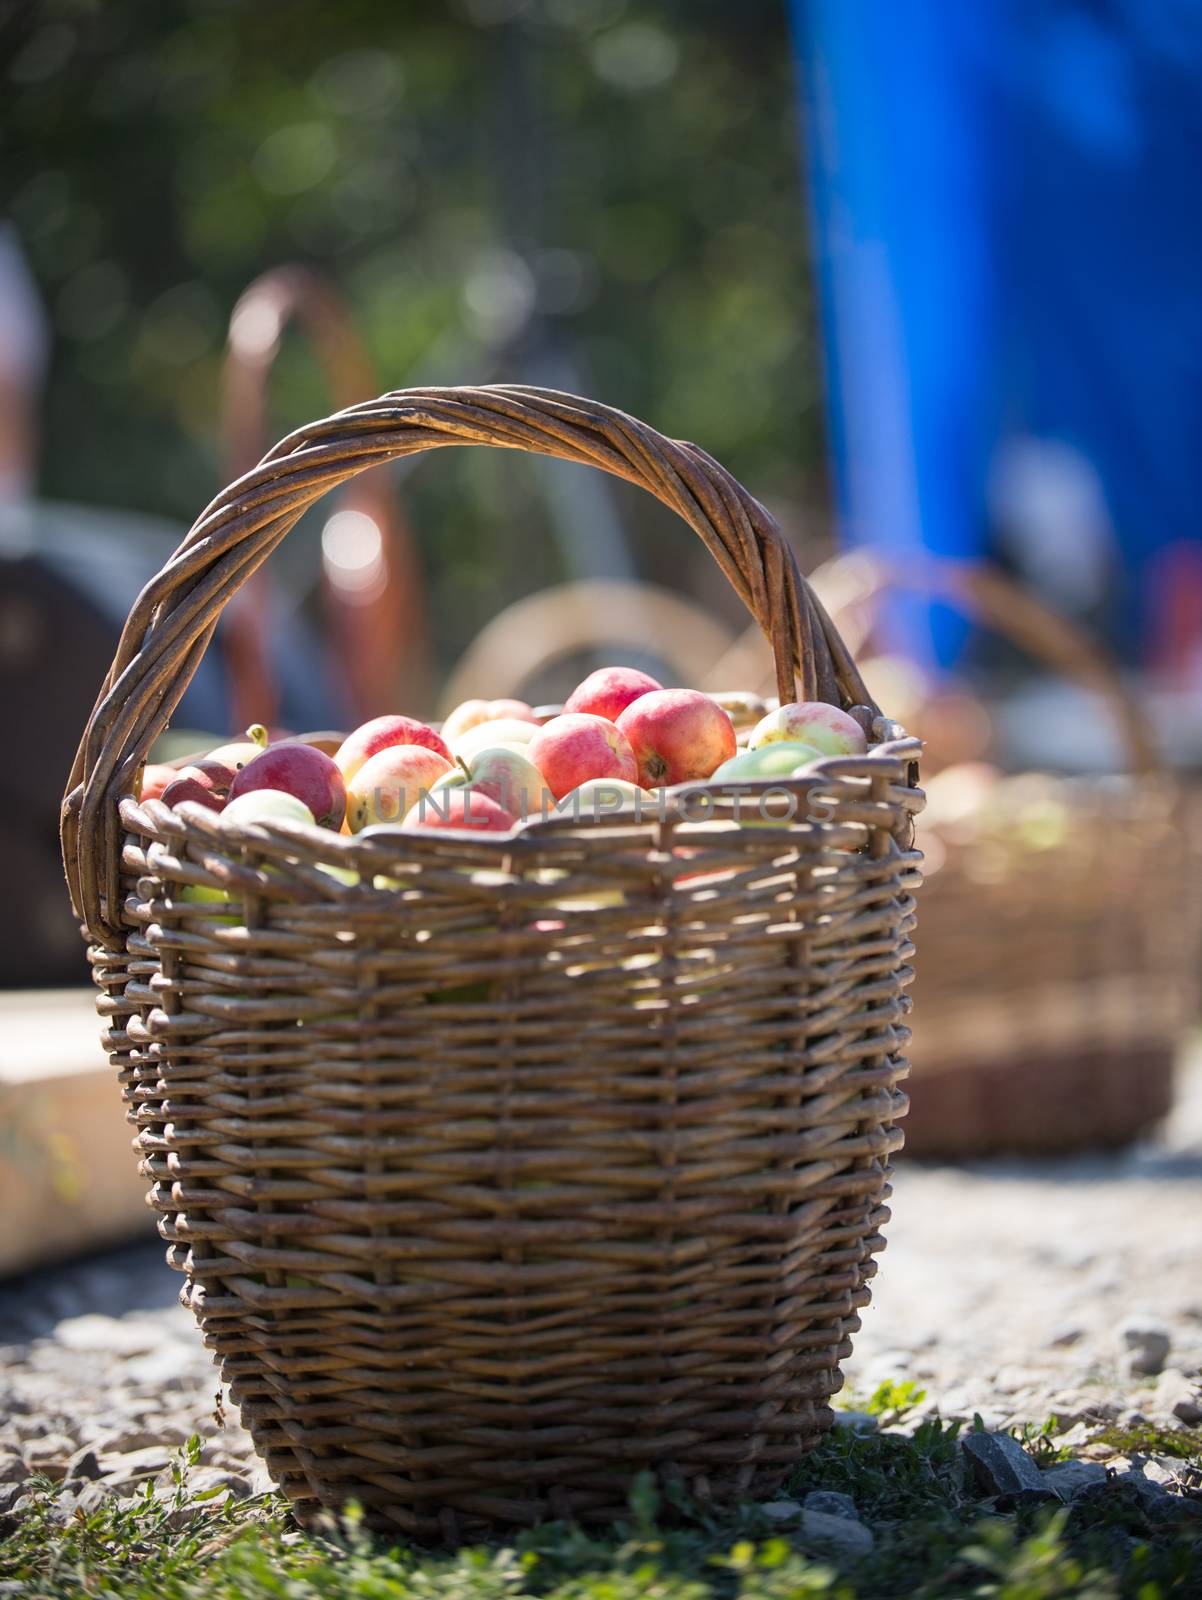 In the foreground is a basket of apples on the grass on the Russian folk festival by Studia72